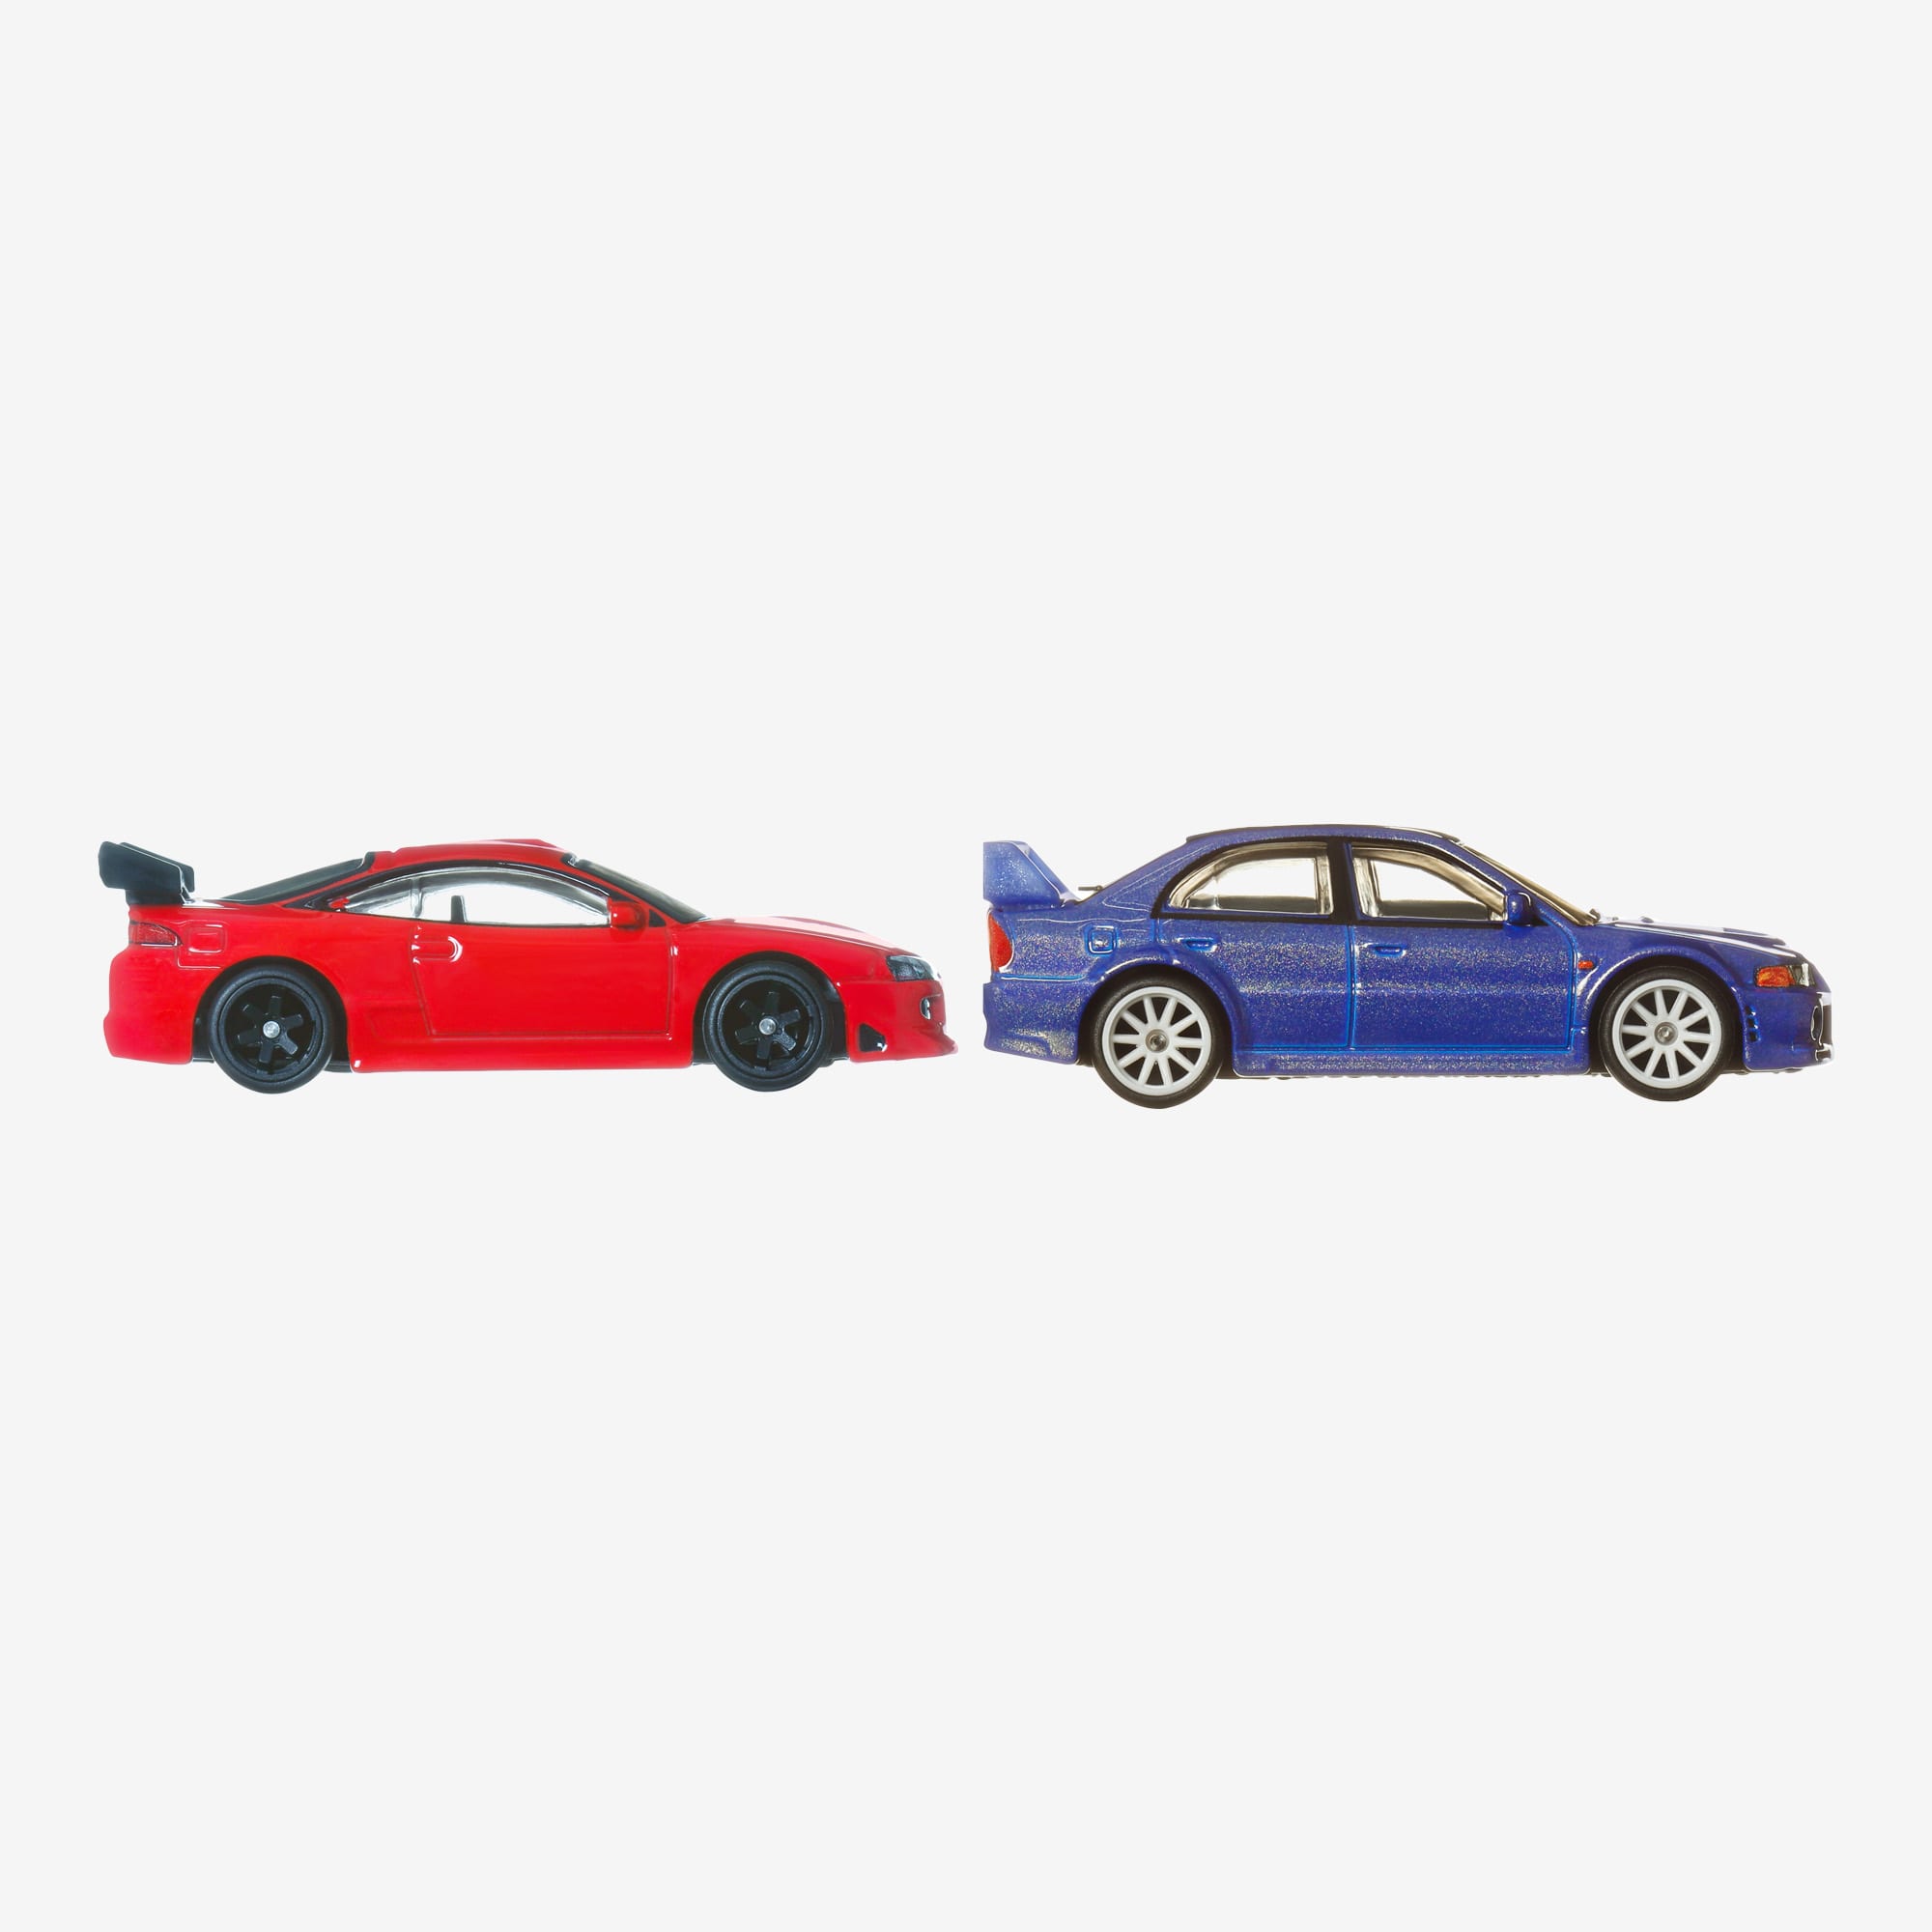 The Hot Wheels® Premium Car Culture 2-pack was designed for the